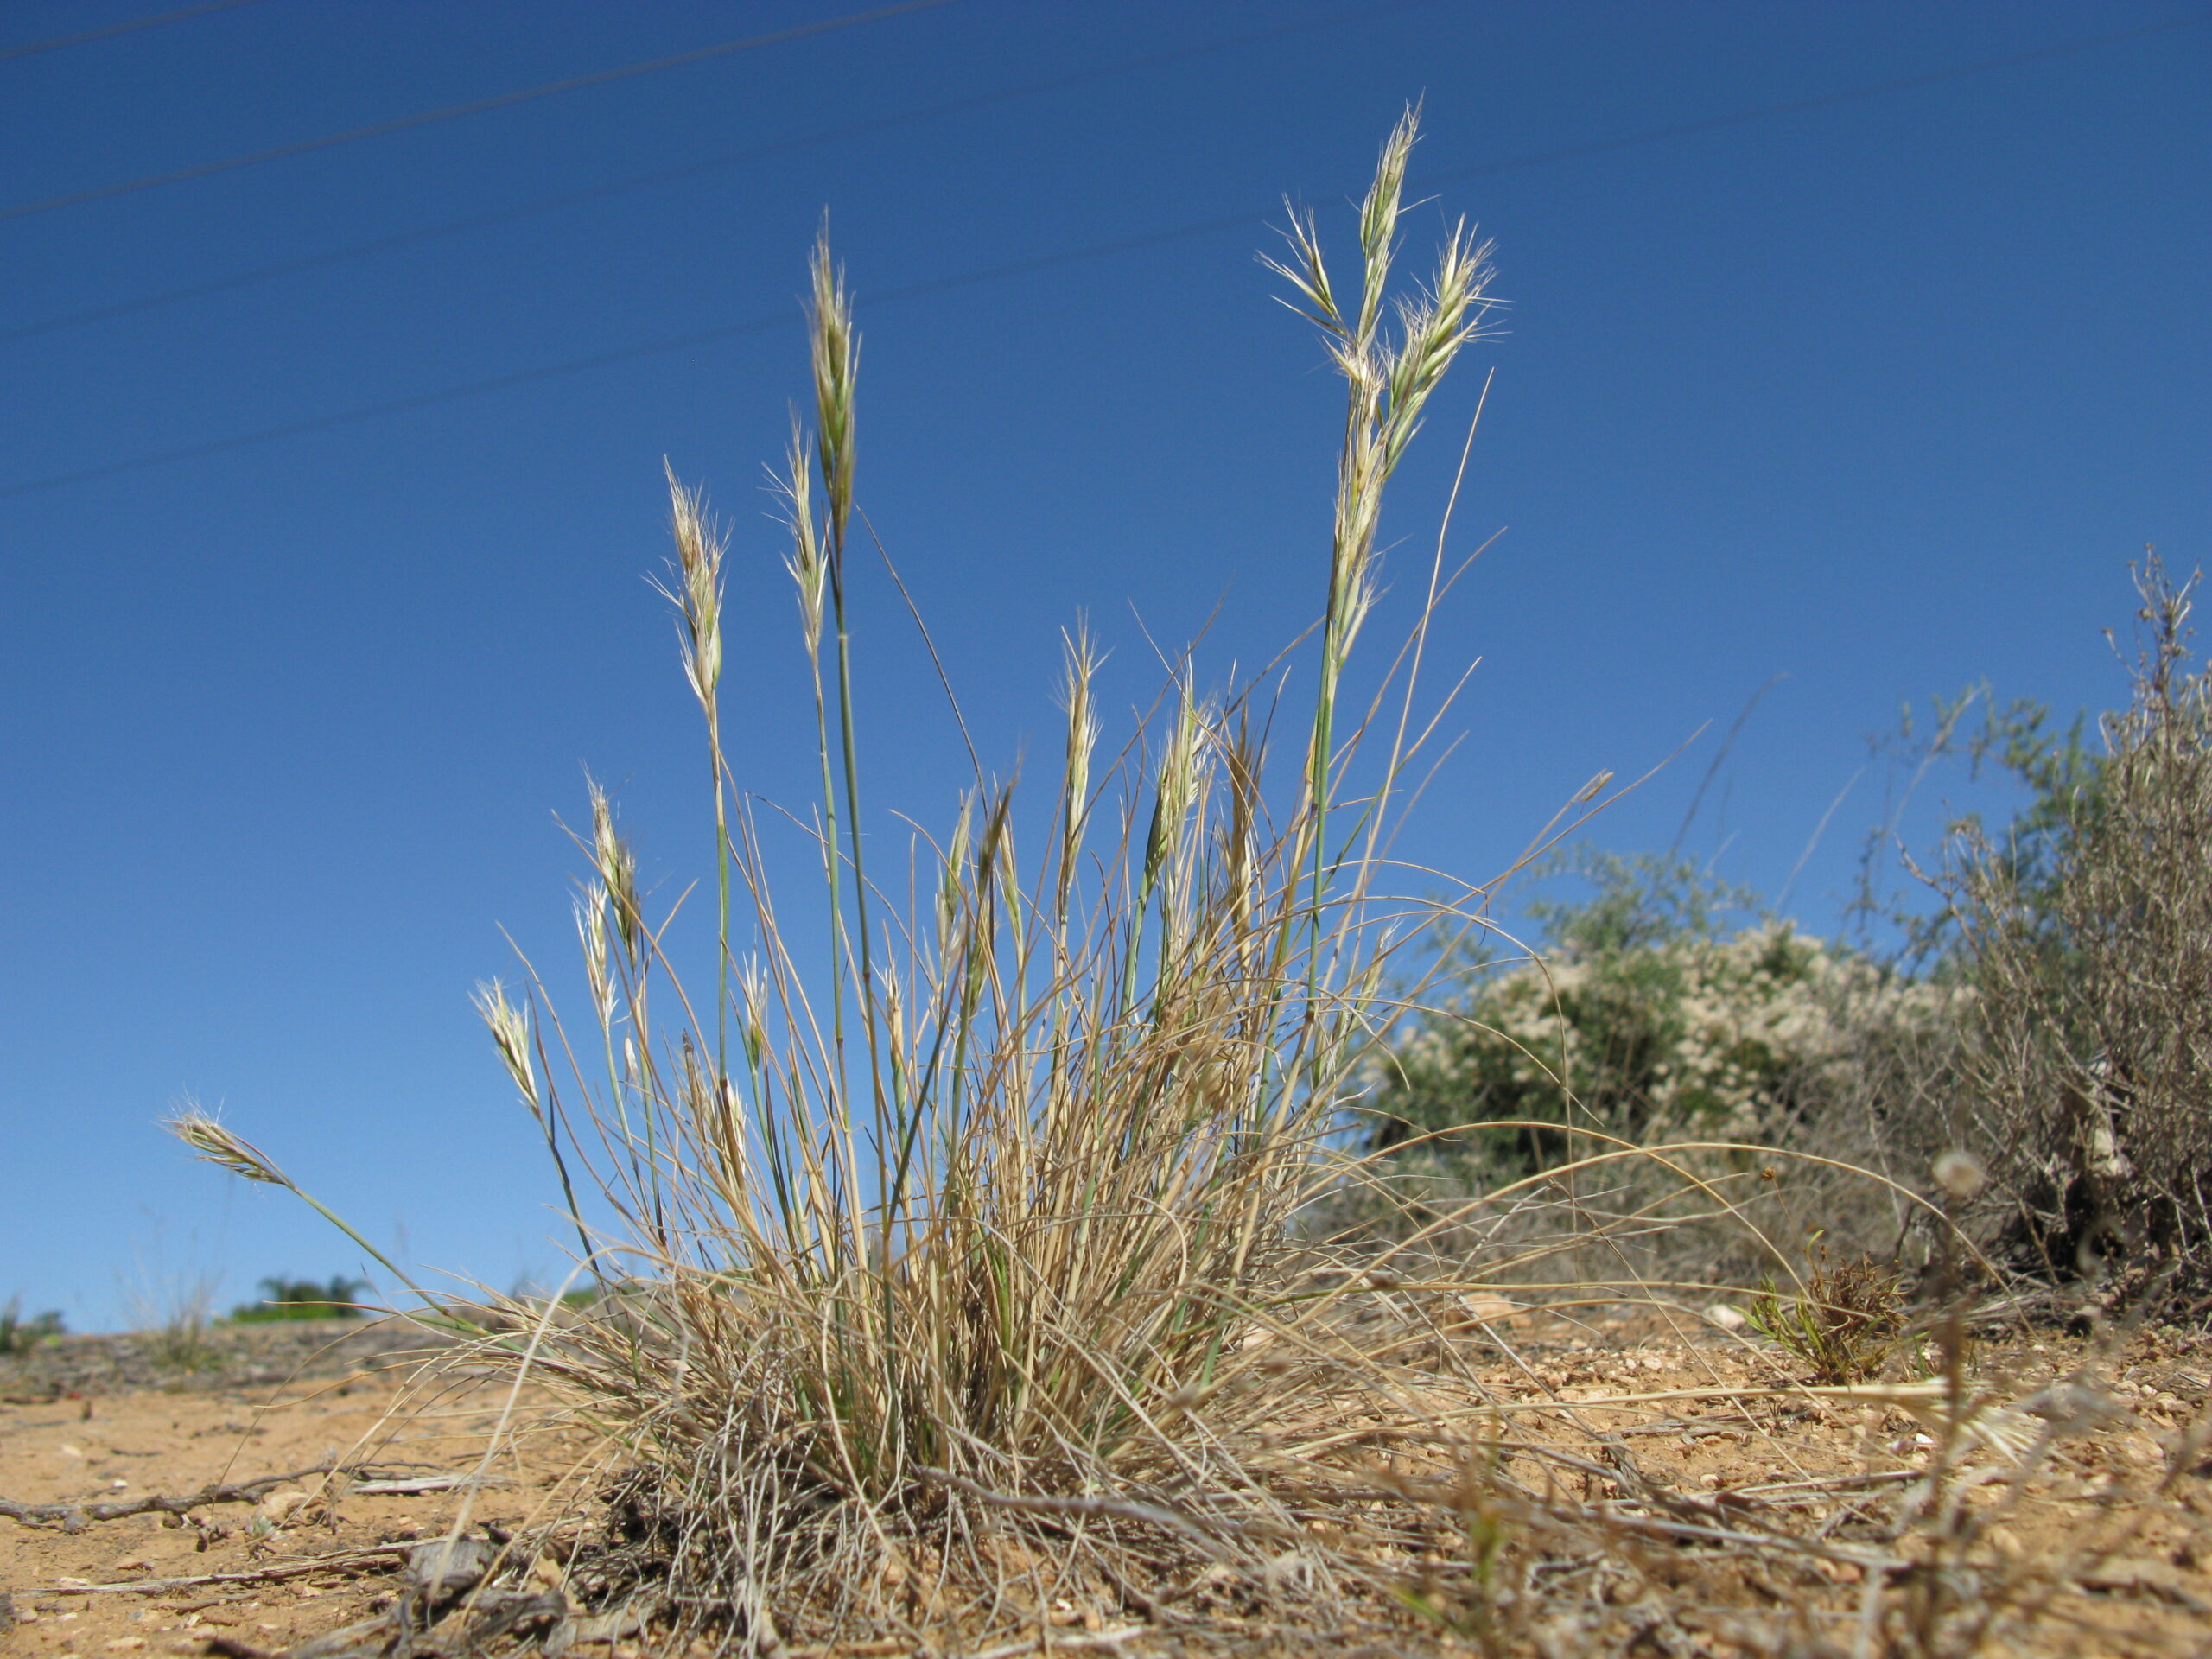 Photograph of bristly wallaby-grass. The photo shows a clump of partially dried grass with bristly inflorescences growing in relatively bare dirt. Some shrubs can be seen in the background.